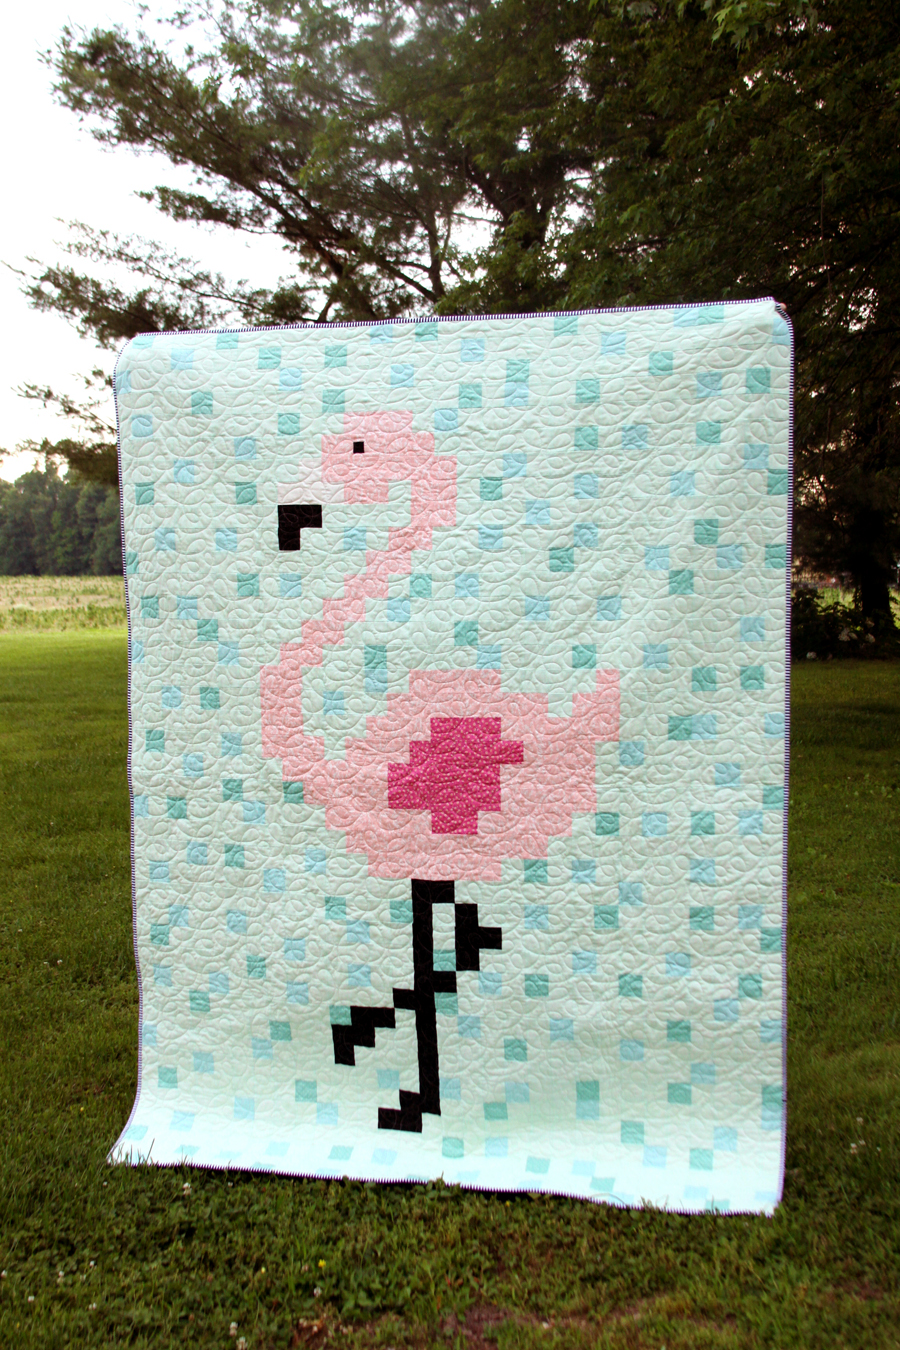 Flamingo Pixel Quilt Tutorial and many other pixel quilts!